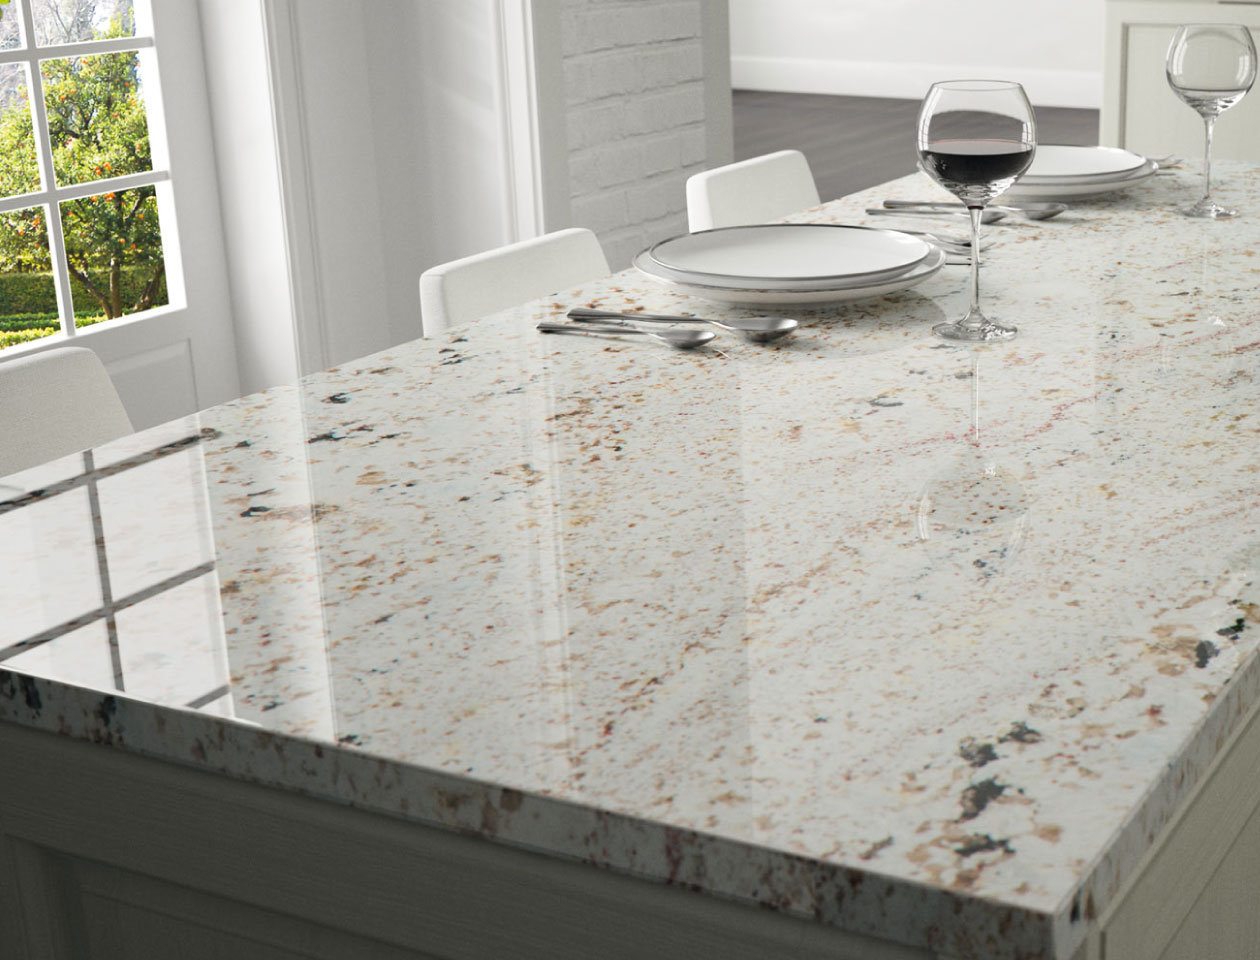 Choosing The Right Countertop For Your Home Granite Countertops